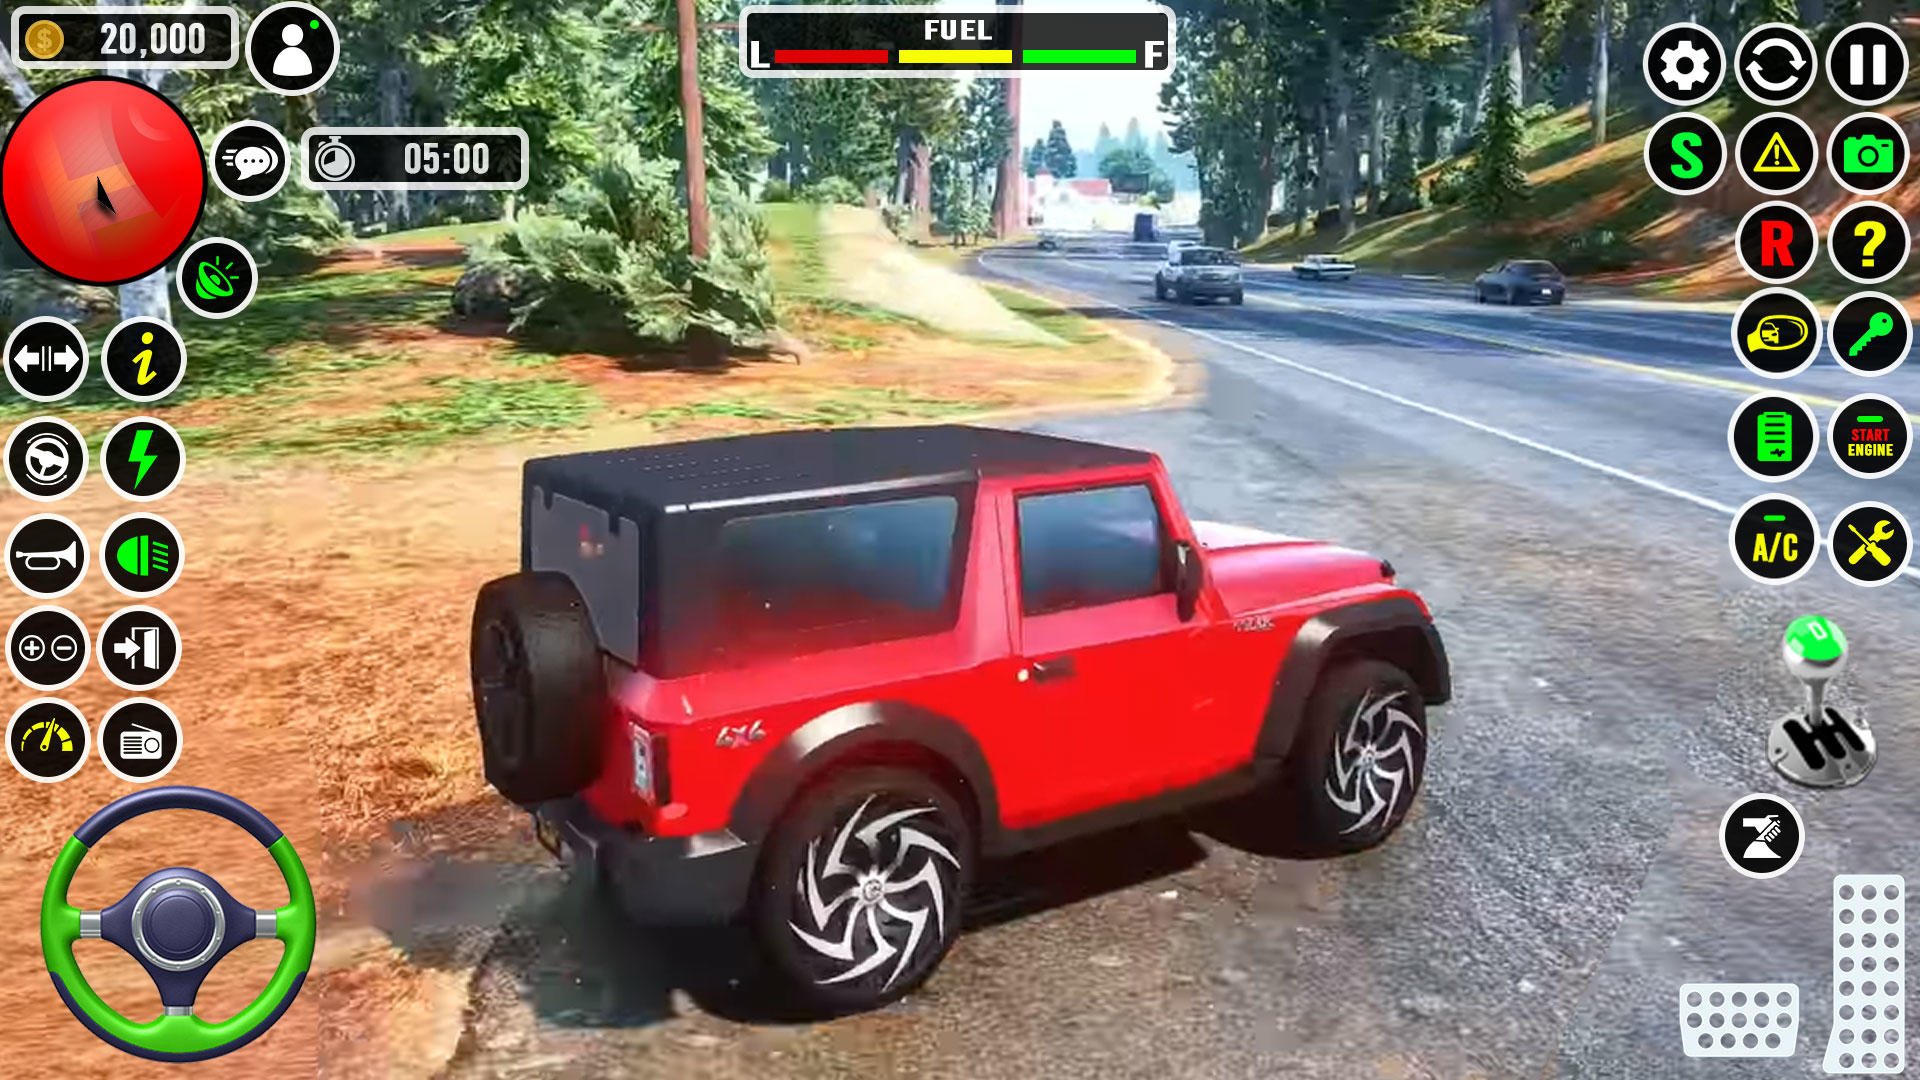 Screenshot 1 of Game Jeep 4x4 Jeep Offroad 0.1